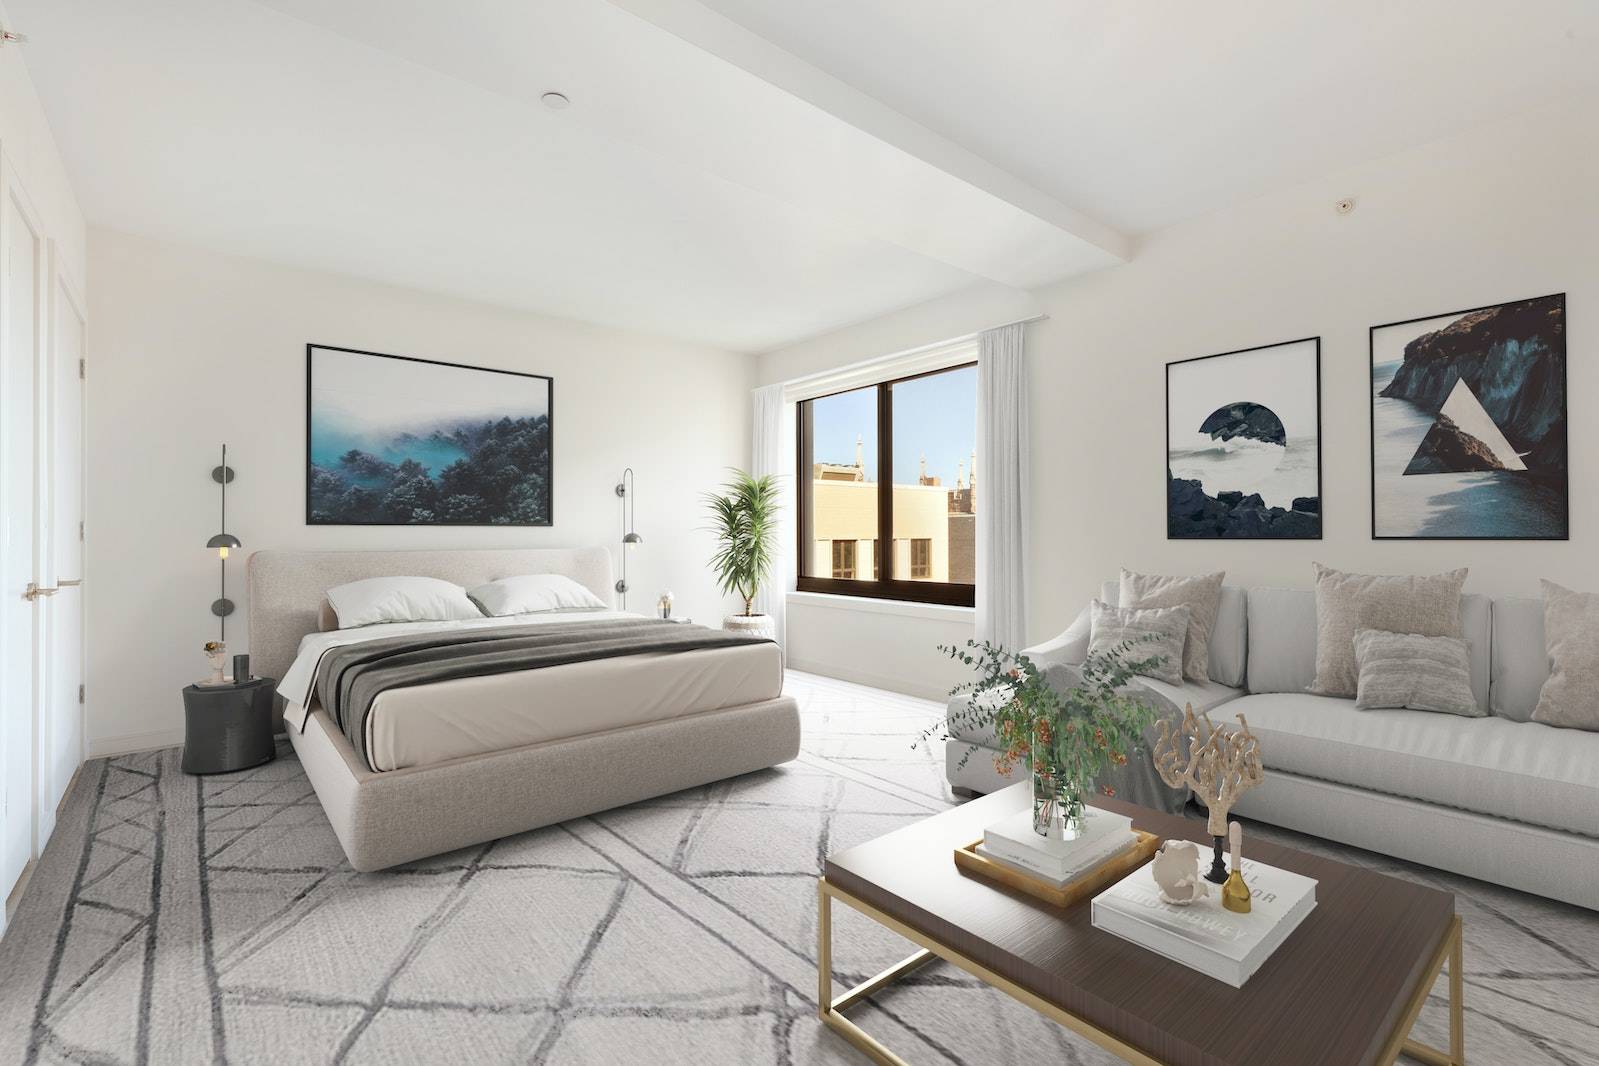 FINAL STUDIO RESIDENCE ! ASK ABOUT OUR INTEREST RATE BUY DOWN OPTIONS The Opportunity Own Your Zone in this gem of a southern exposure studio will exceed your expectations with ...